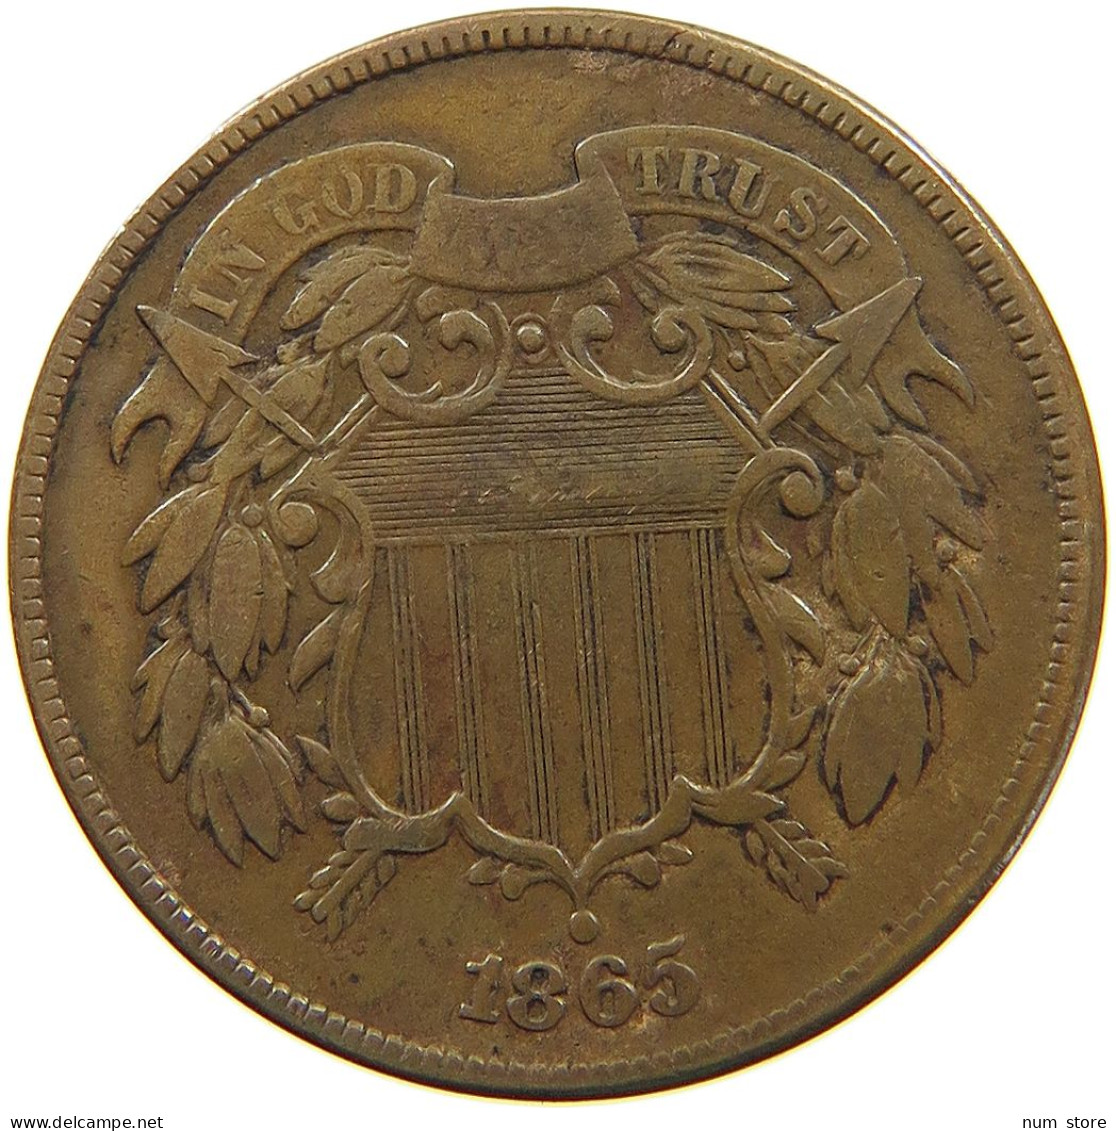 UNITED STATES OF AMERICA TWO CENTS 1865  #t086 0135 - 2, 3 & 20 Cent